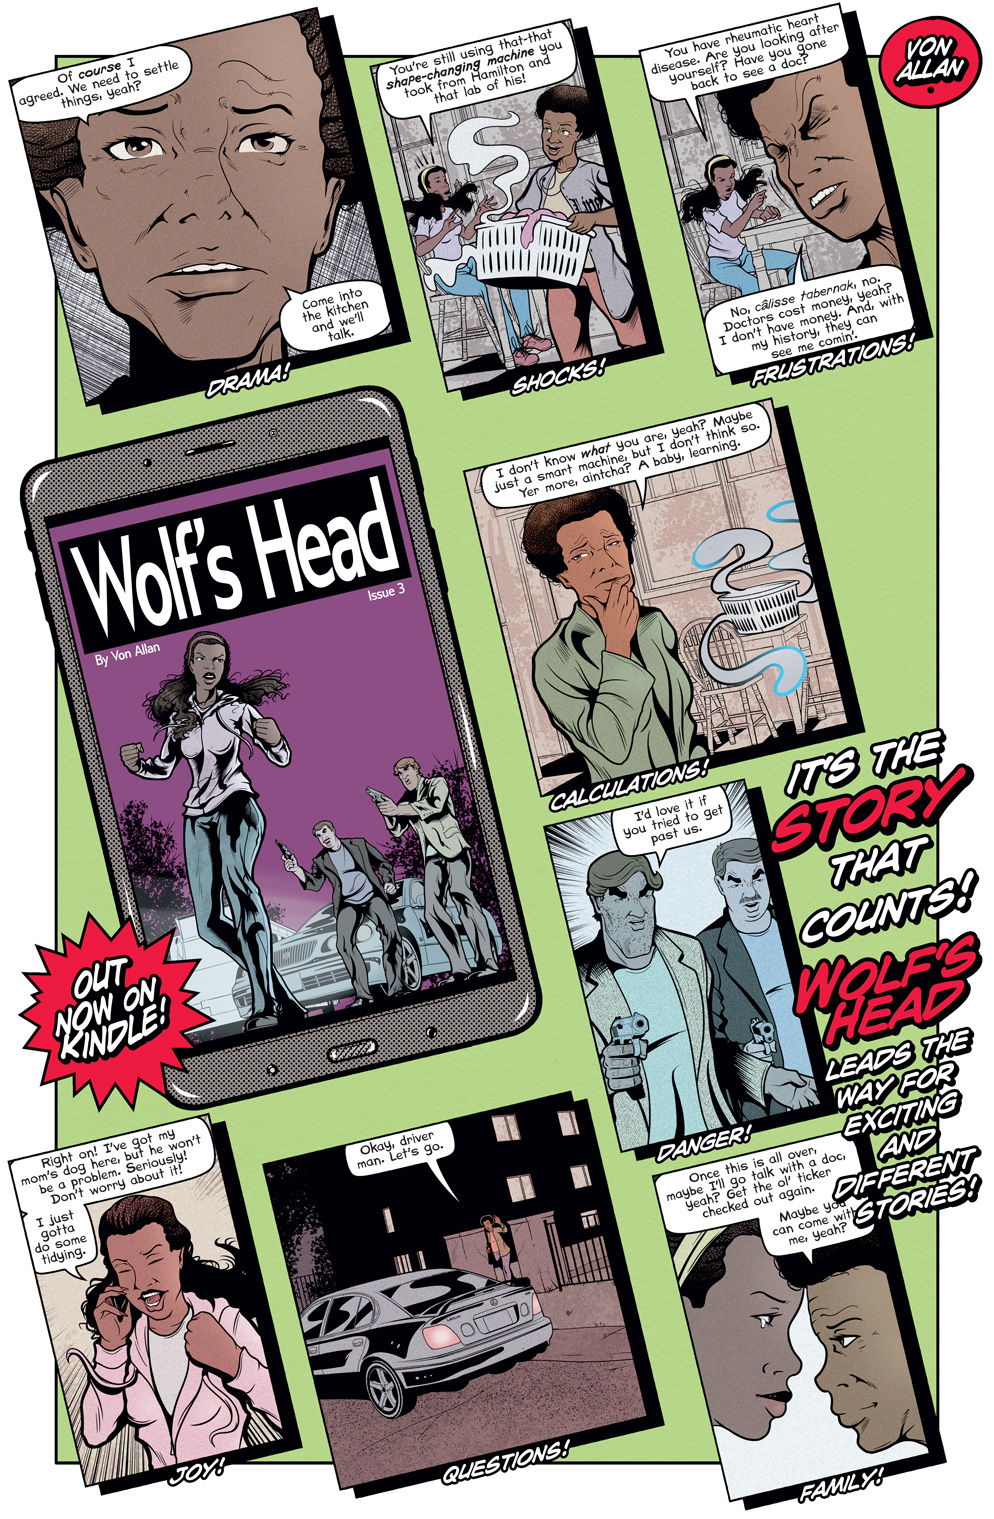 Teaser image for Wolf's Head issue 3 on Kindle